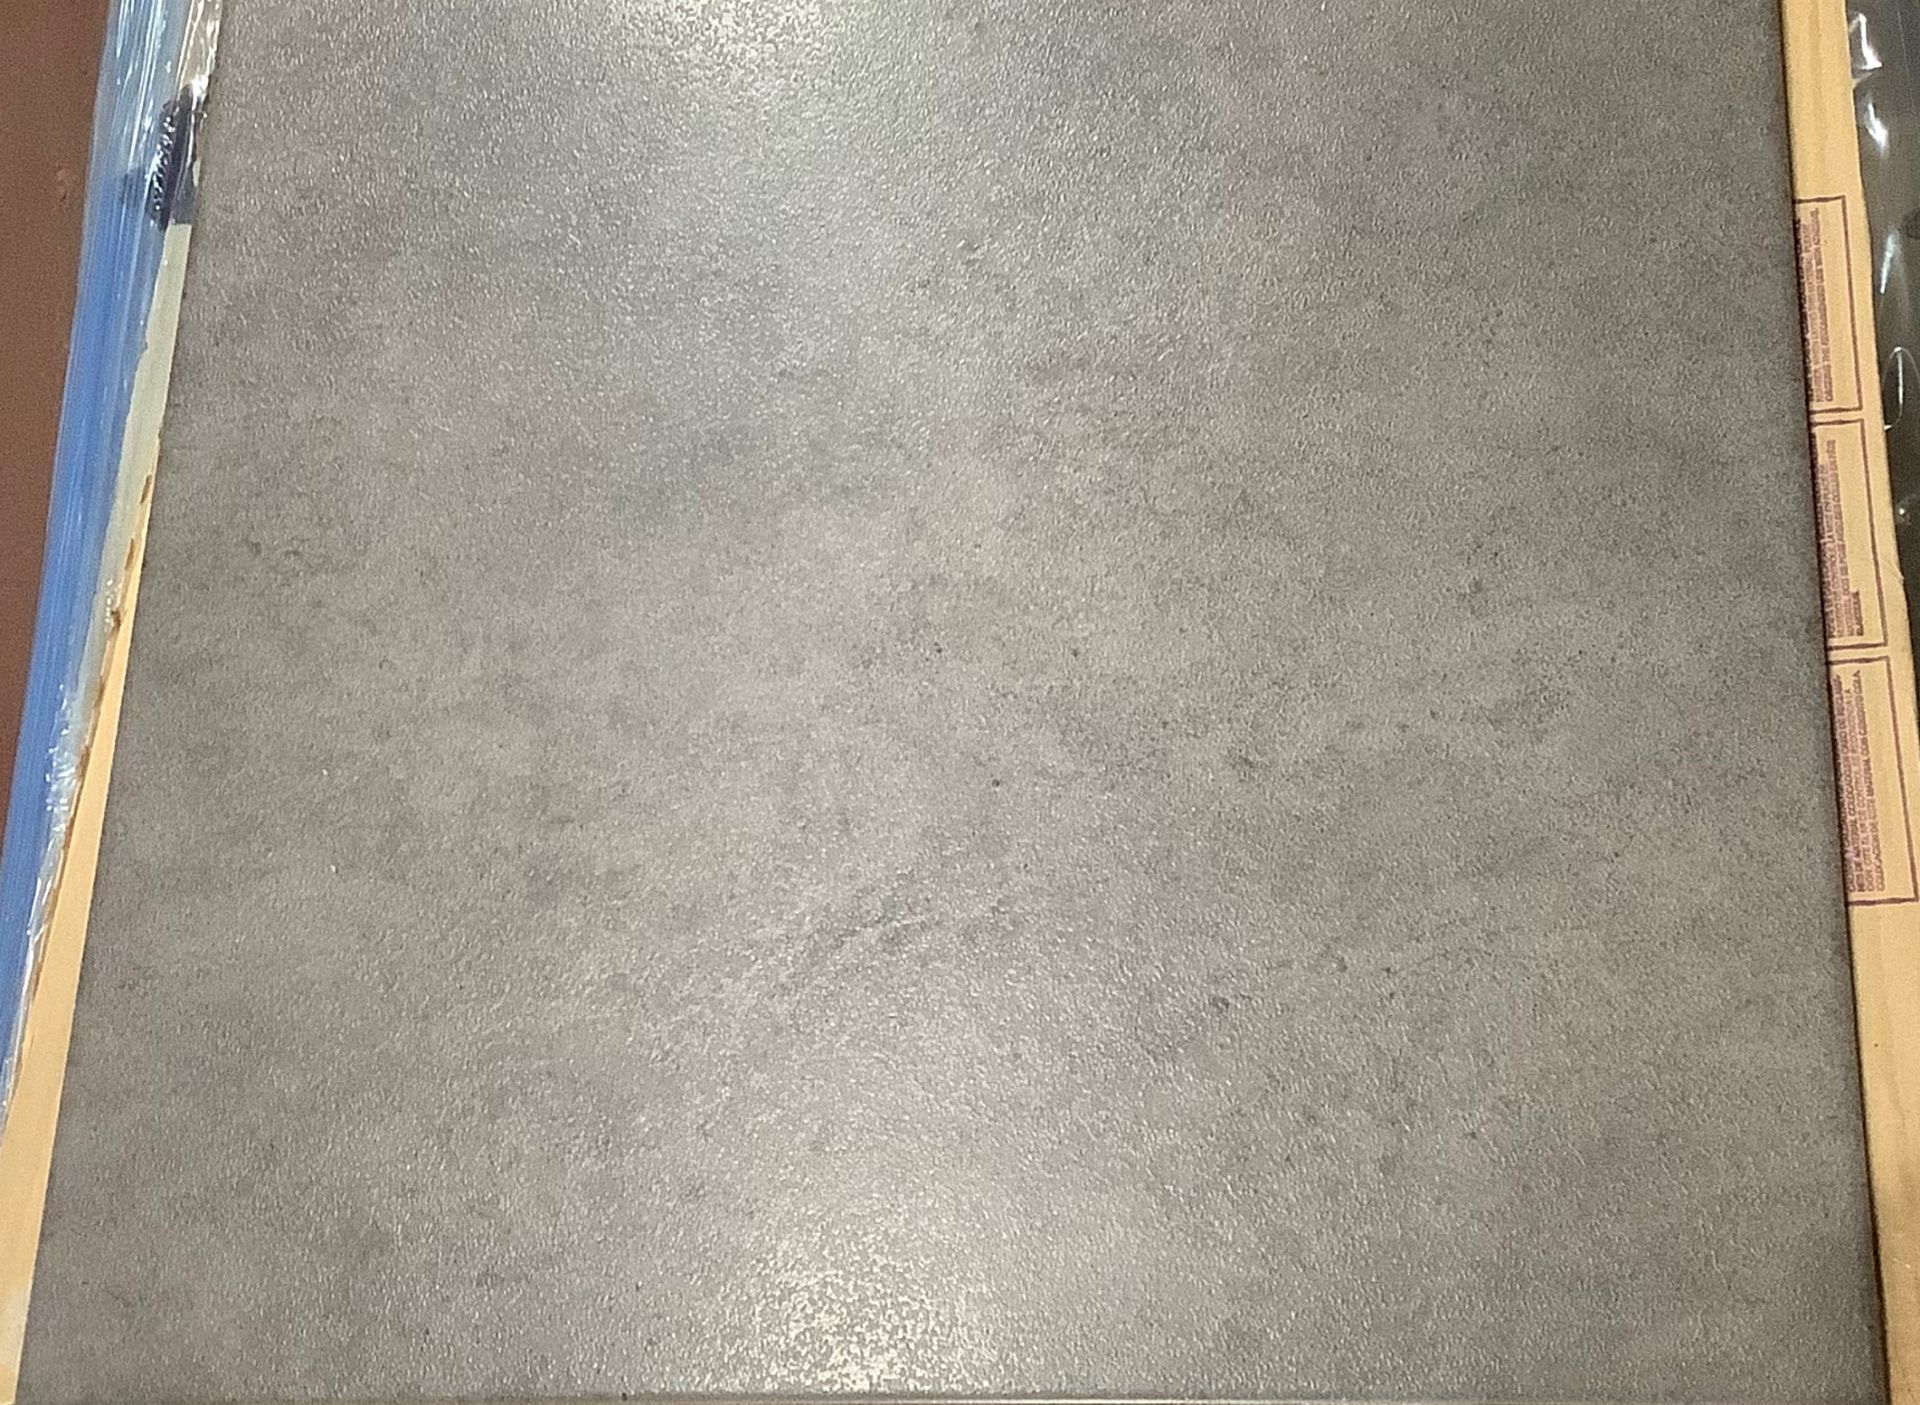 NEW 7.1m2 Porland Marengo Grey Wall and Floor Tiles. 450x450mm Per Tile, 8.8mm Thick. Industr... - Image 2 of 3